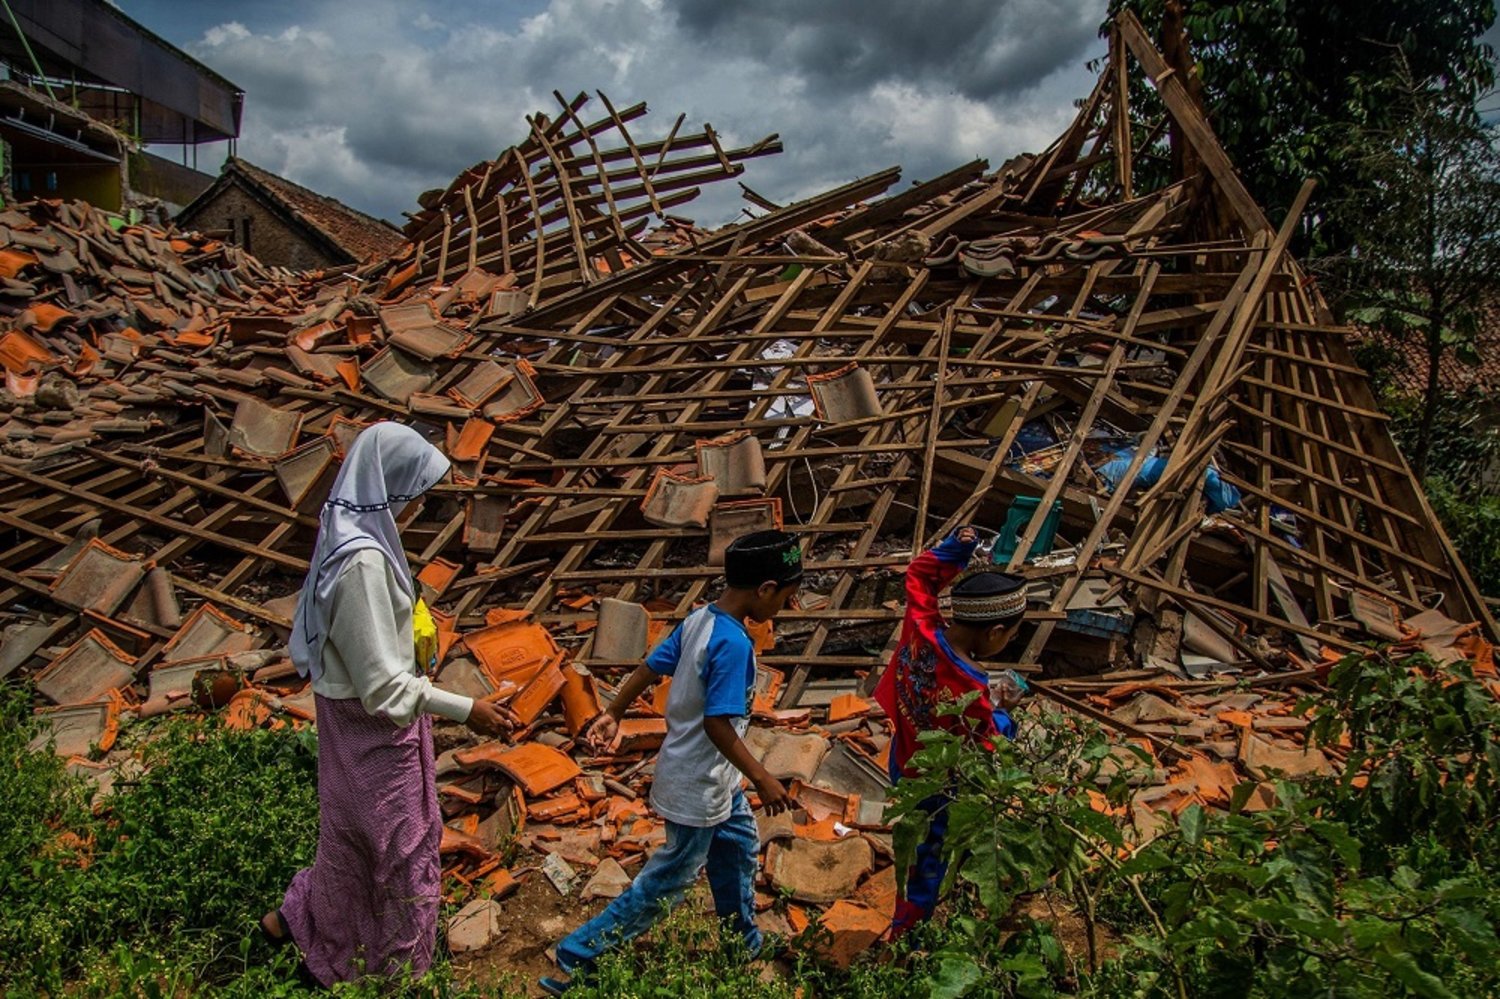 Children walk past a house that collapsed in an earthquake, Cianjur, West Java, Indonesia, Dec. 1, 2022. (AFP)